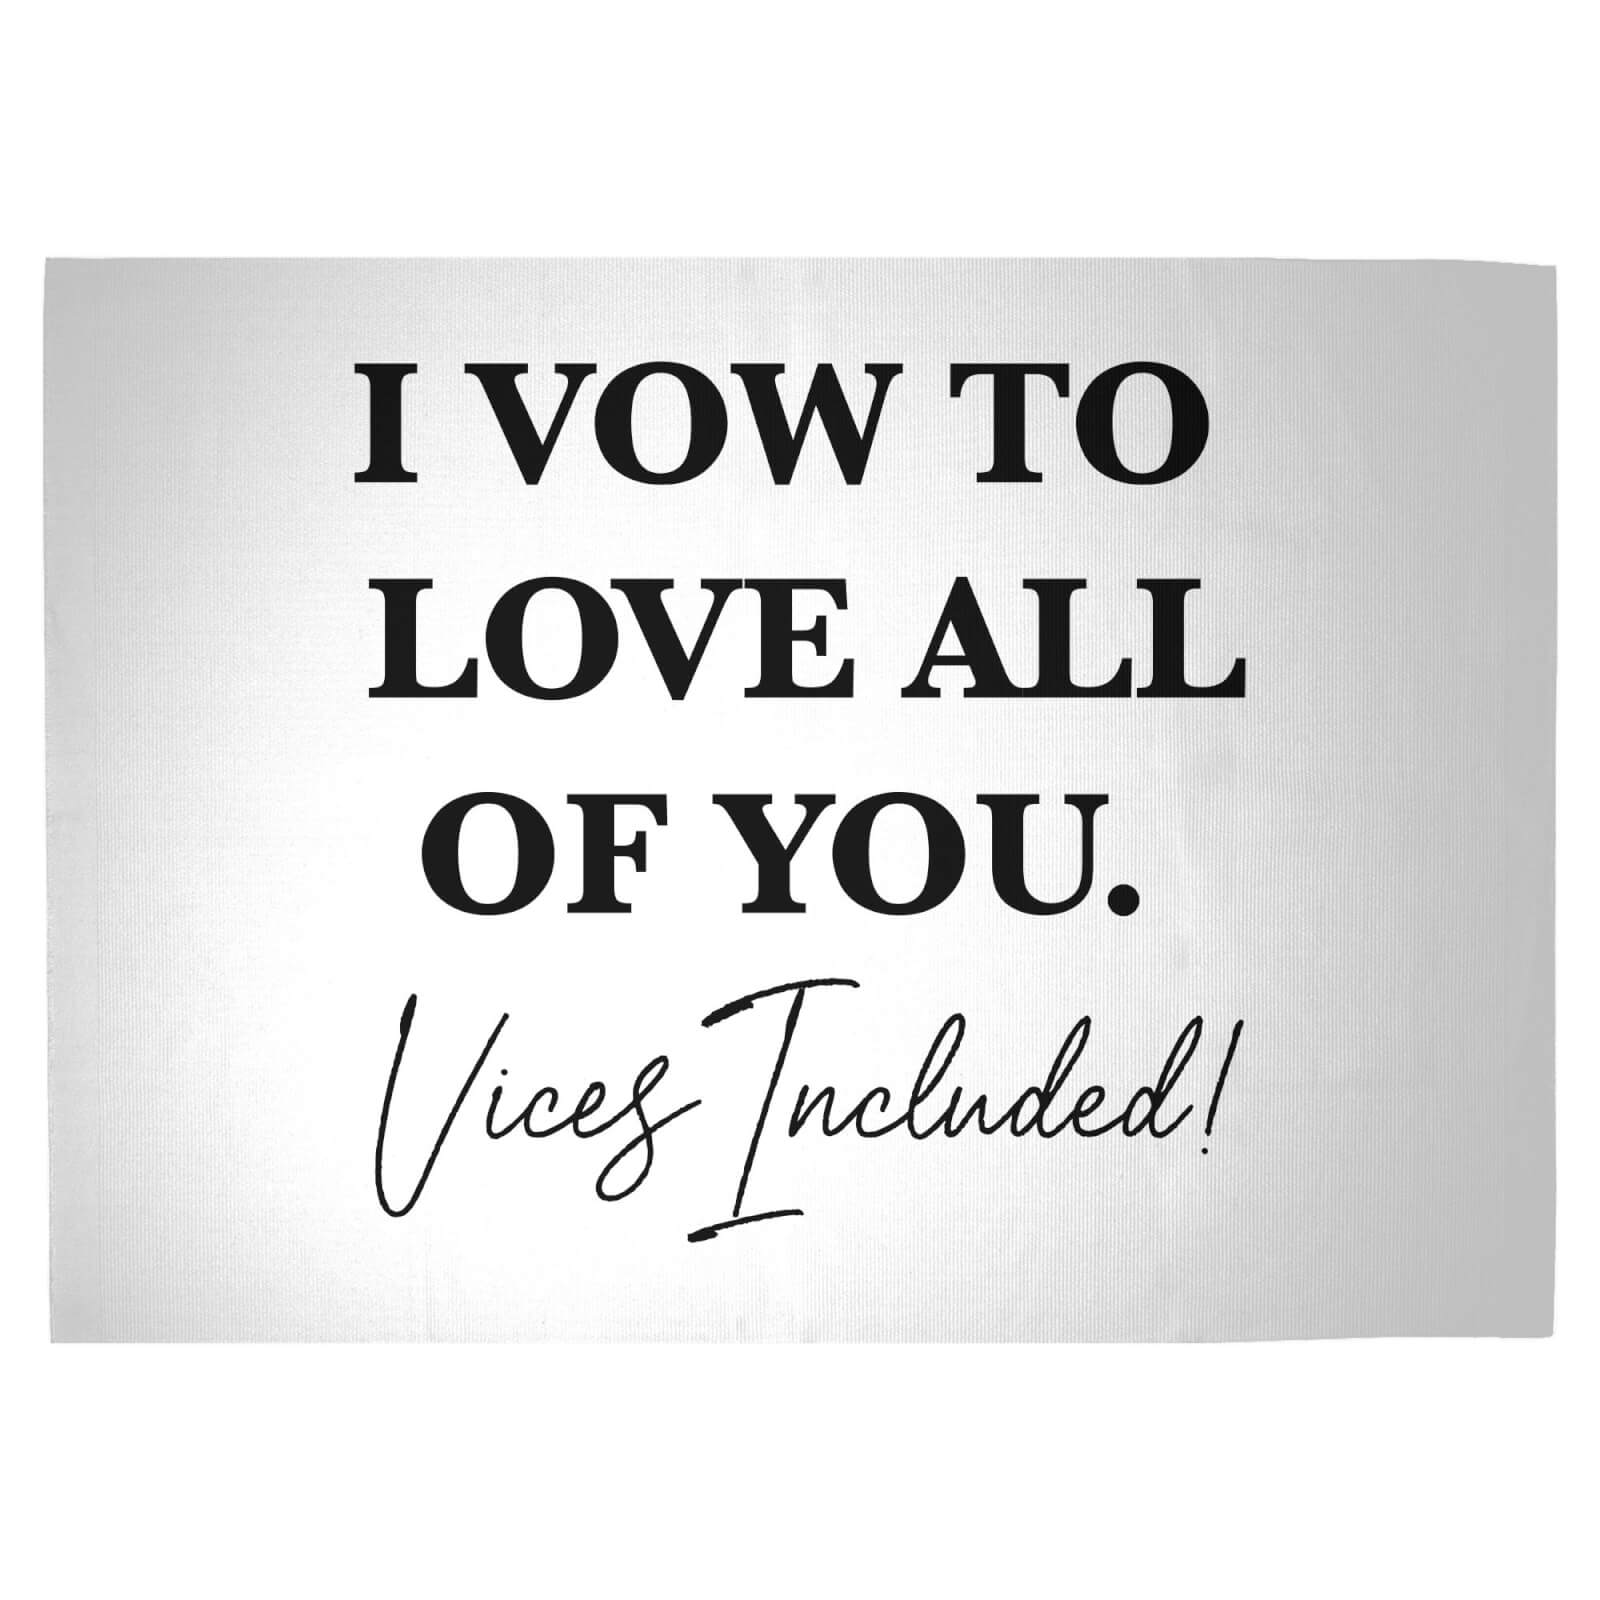 I Vow To Love All Of You. Vices Included Woven Rug - Large